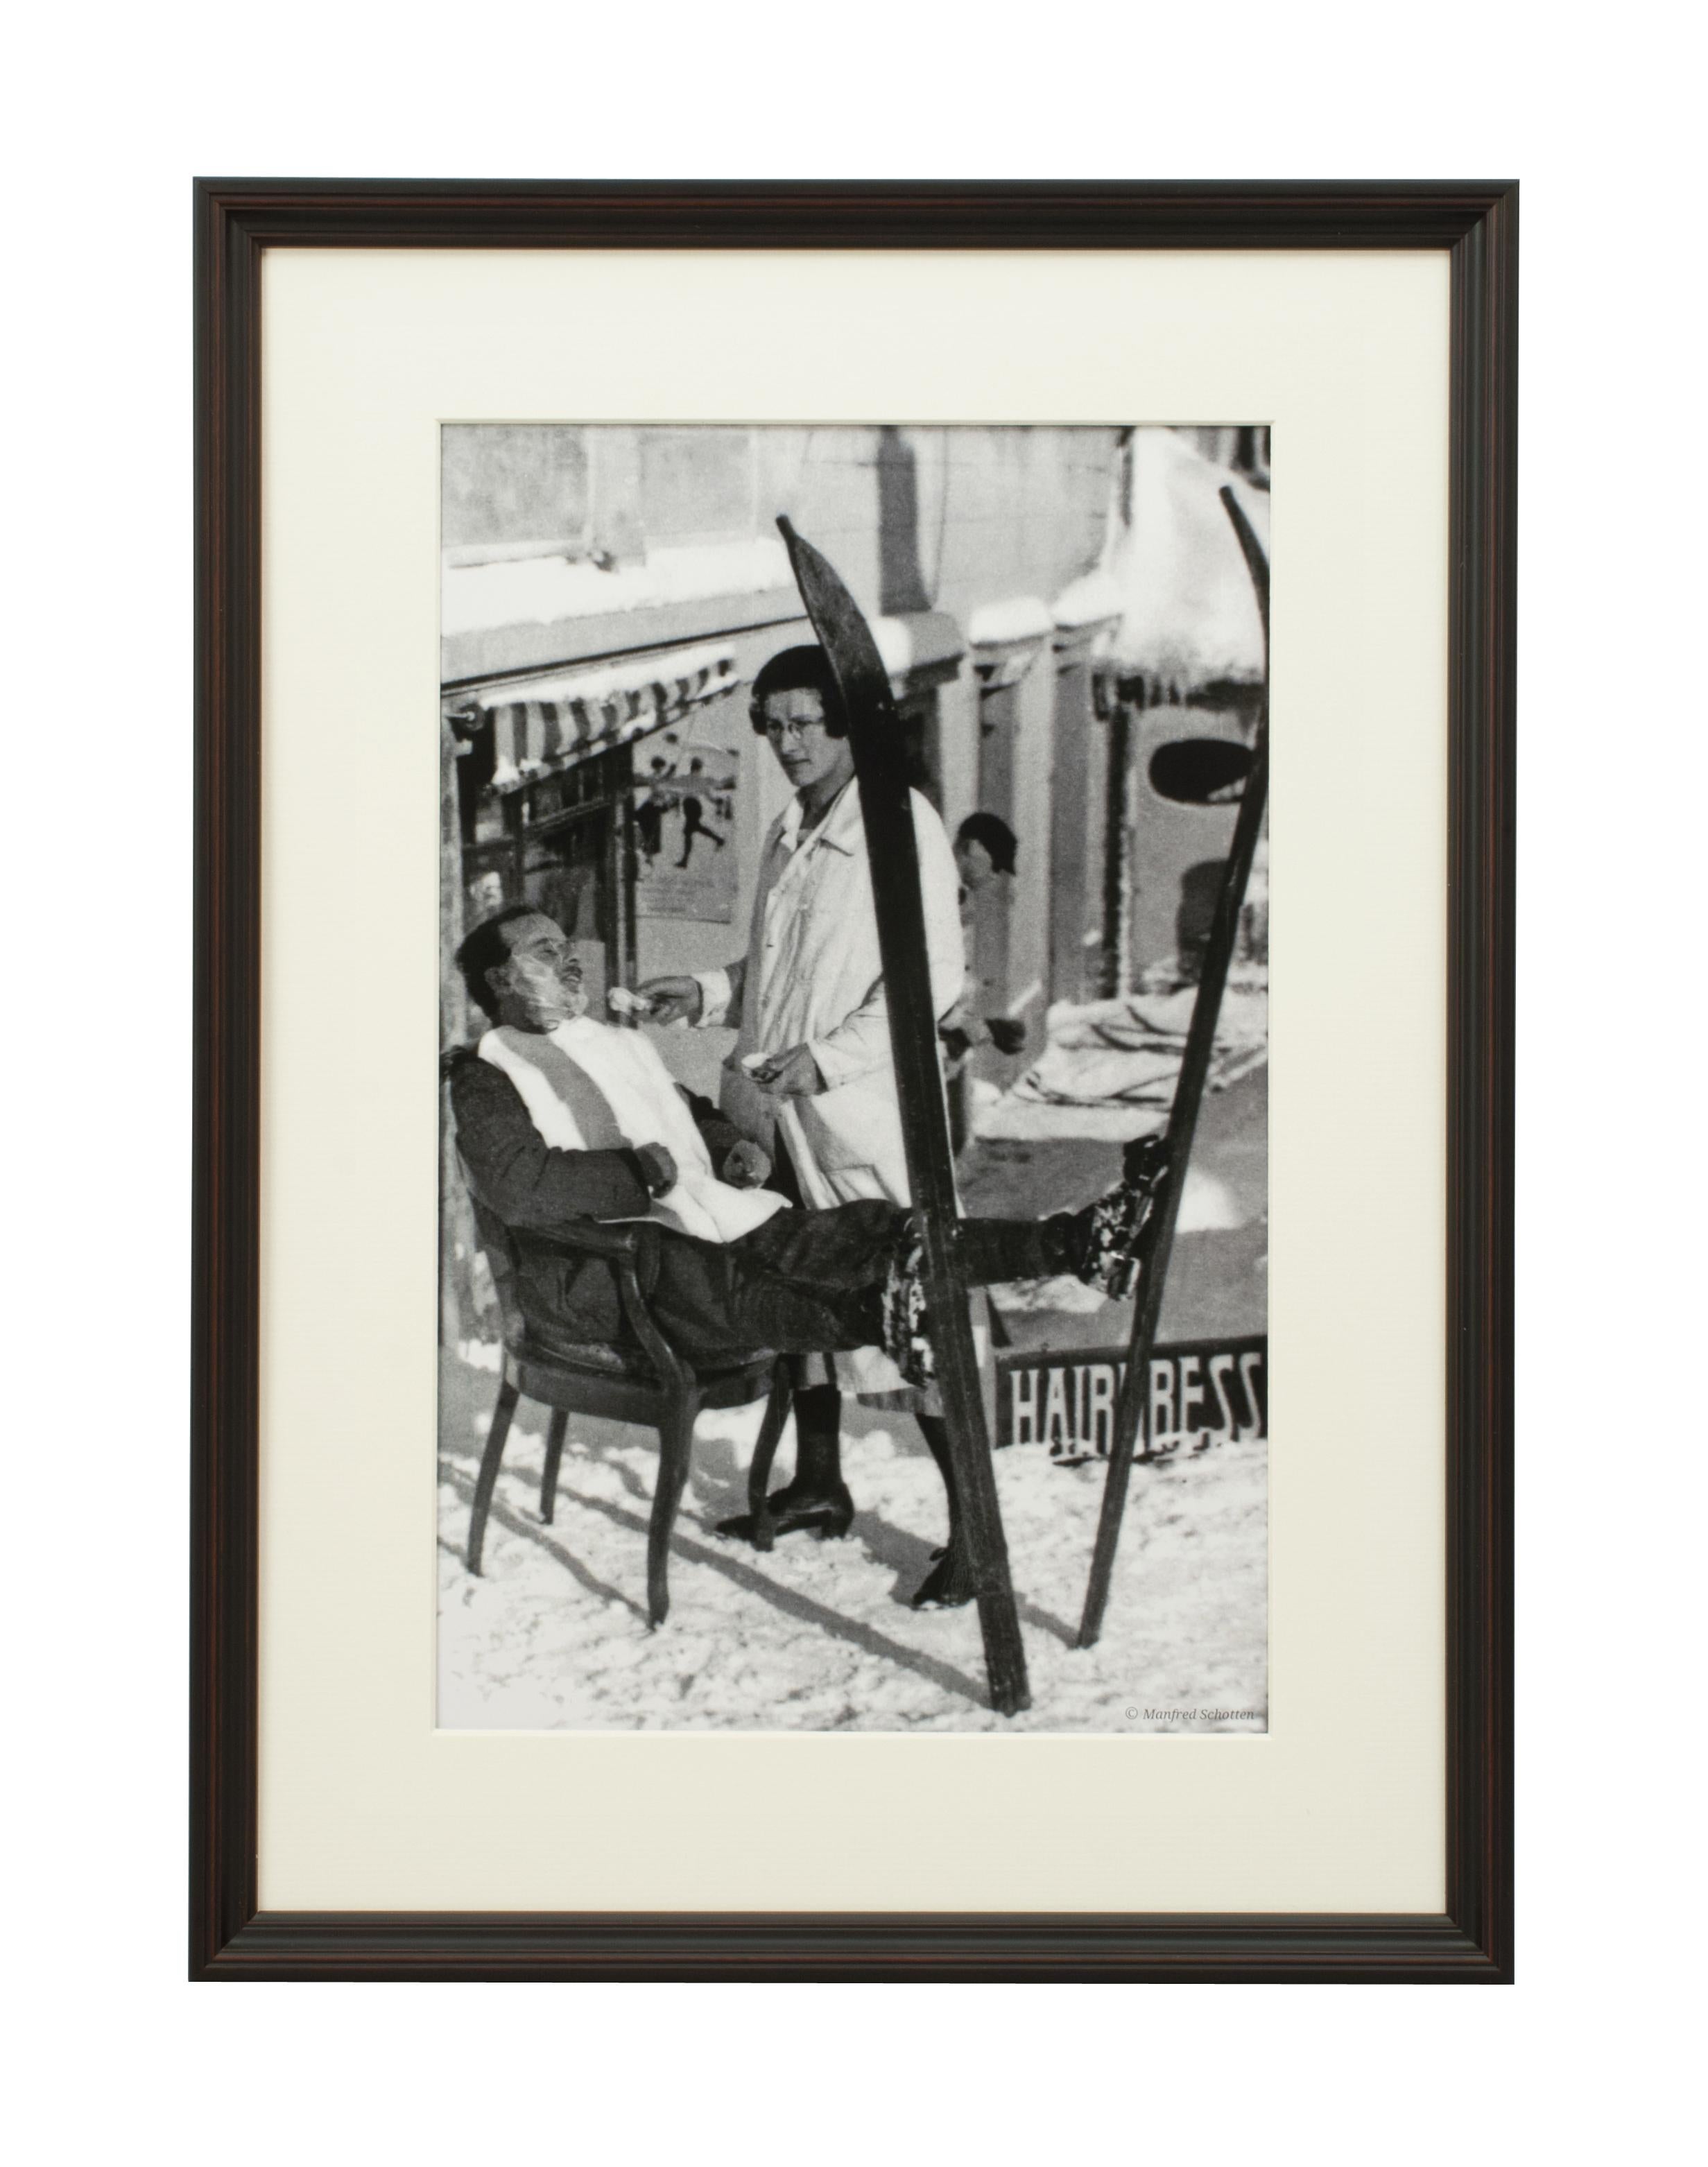 Vintage style Ski Photography, framed Alpine Ski Photograph, Haircut Sir.
'HAIRCUT SIR', a modern framed and mounted black and white photographic image after an original 1930s skiing photograph. The frame is a hand coloured reeded wooden black